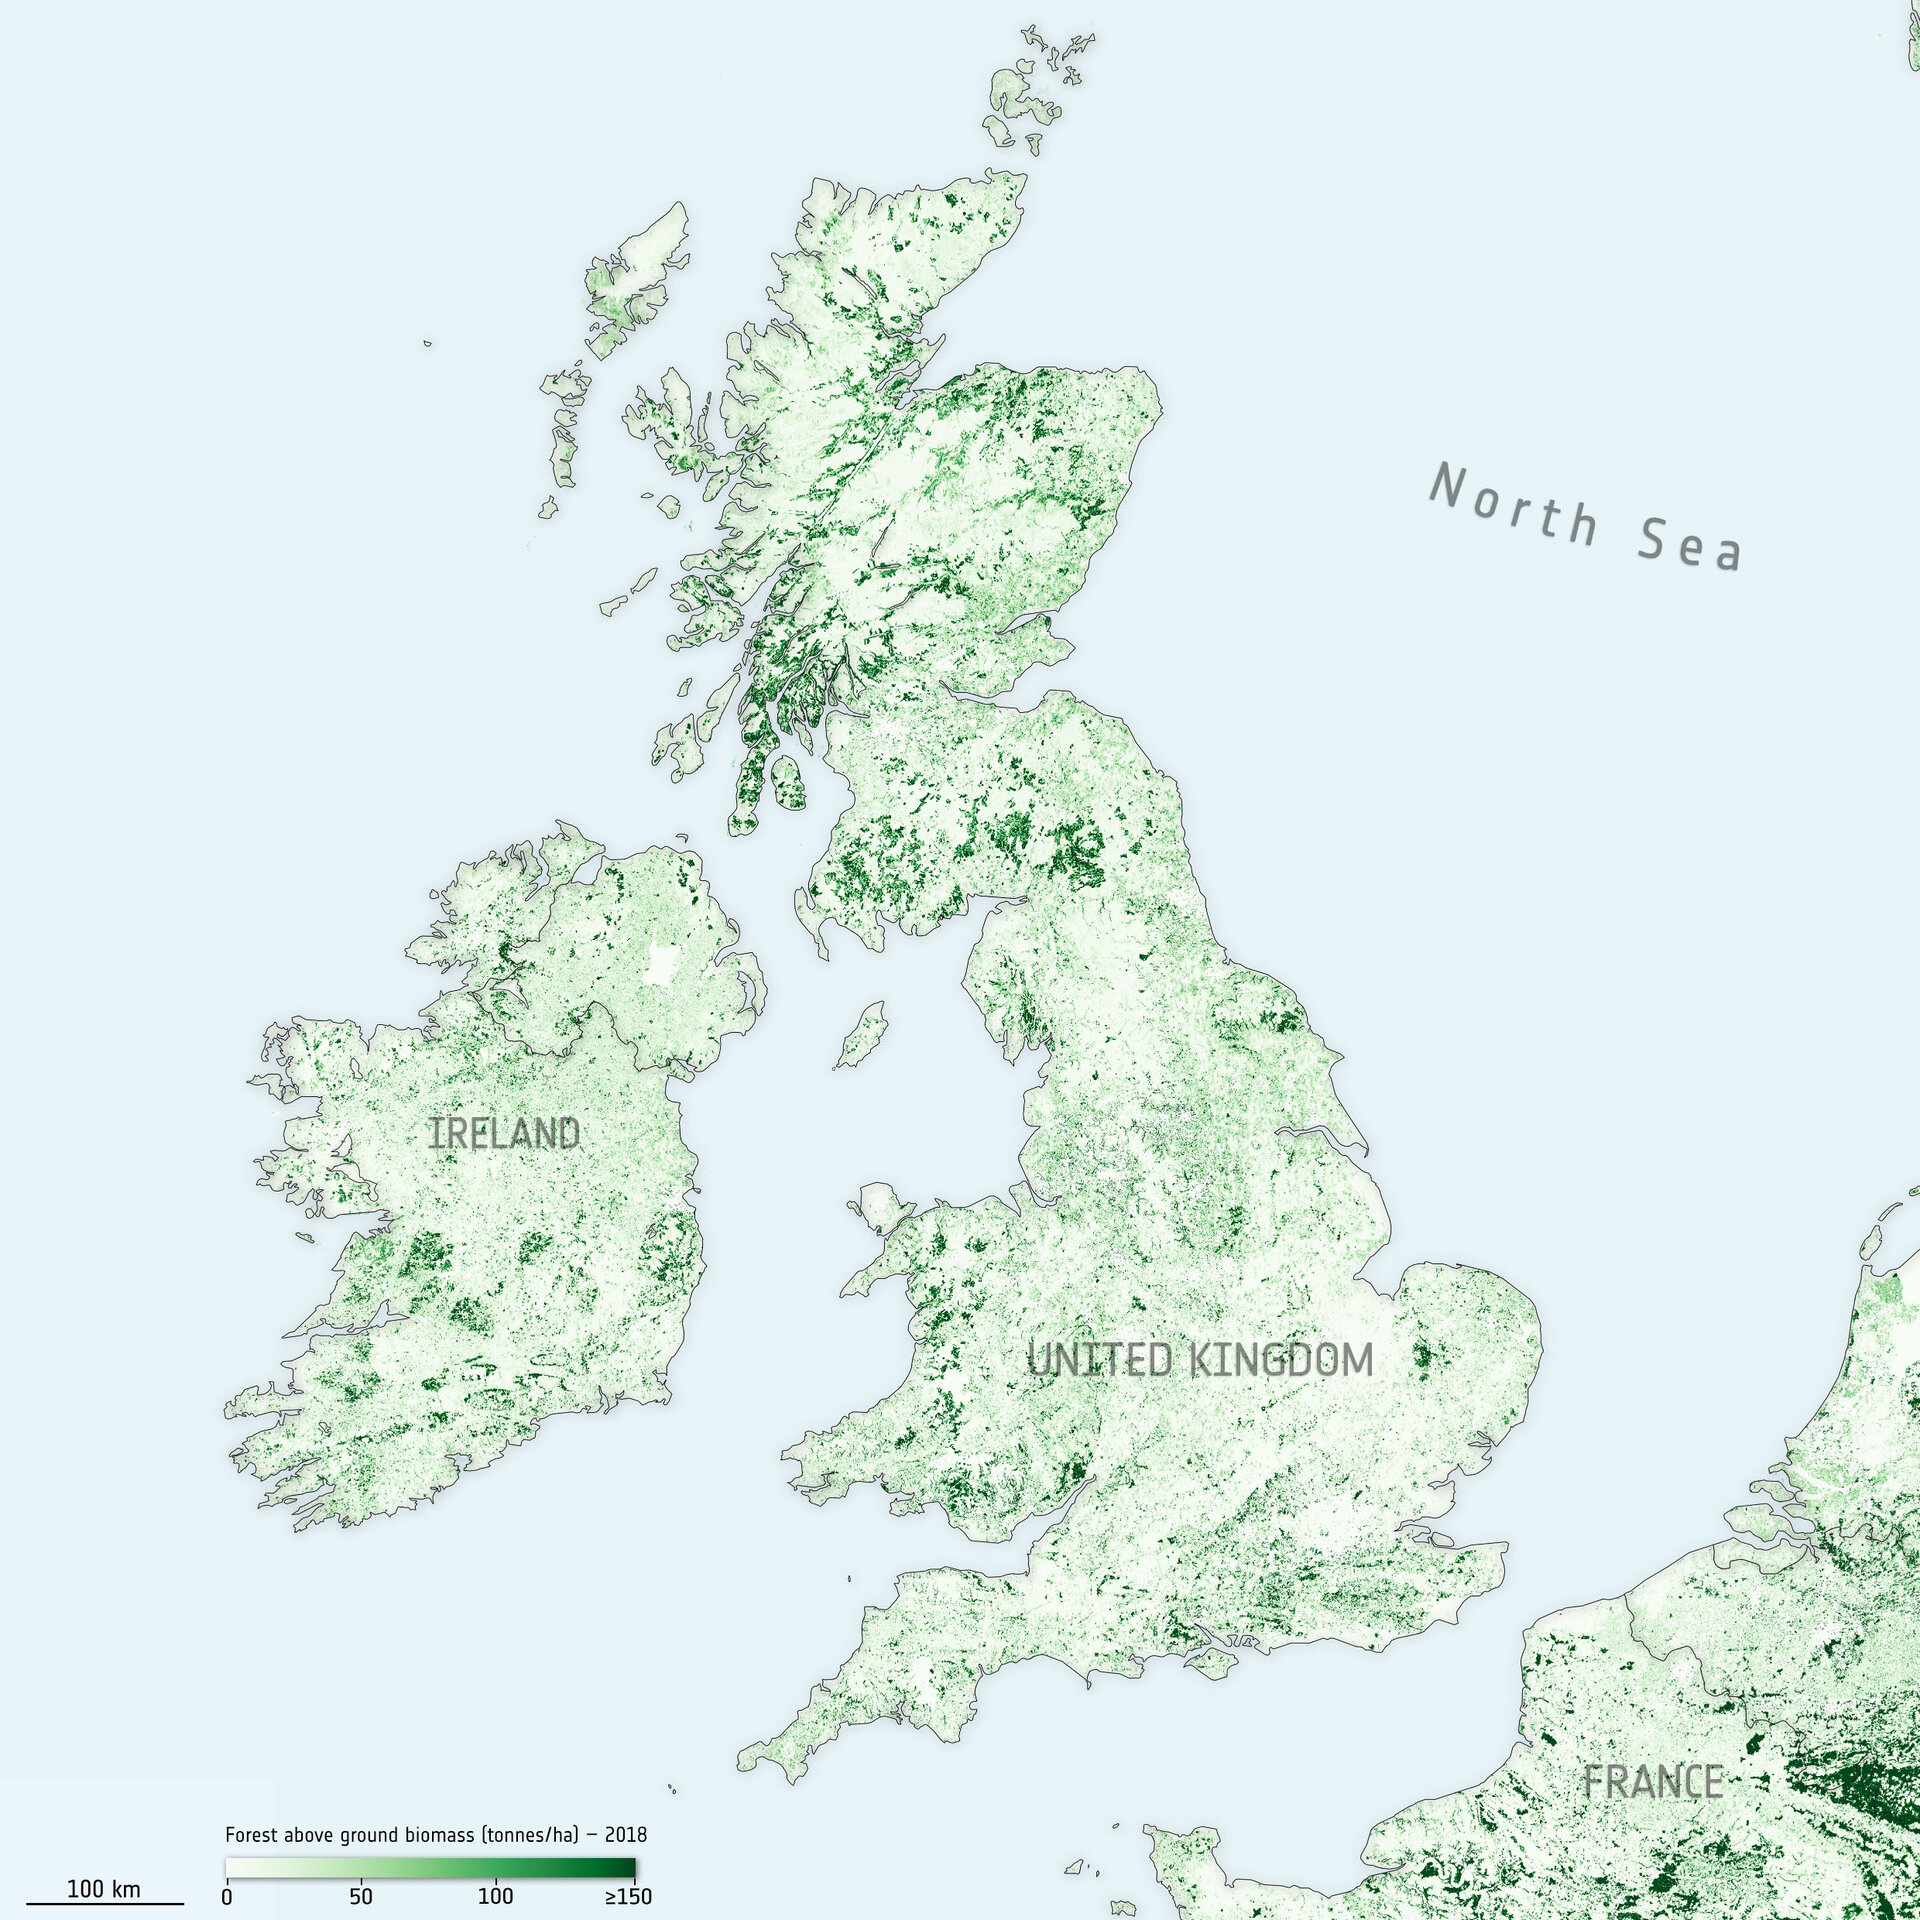 Above ground biomass in the United Kingdom and Ireland